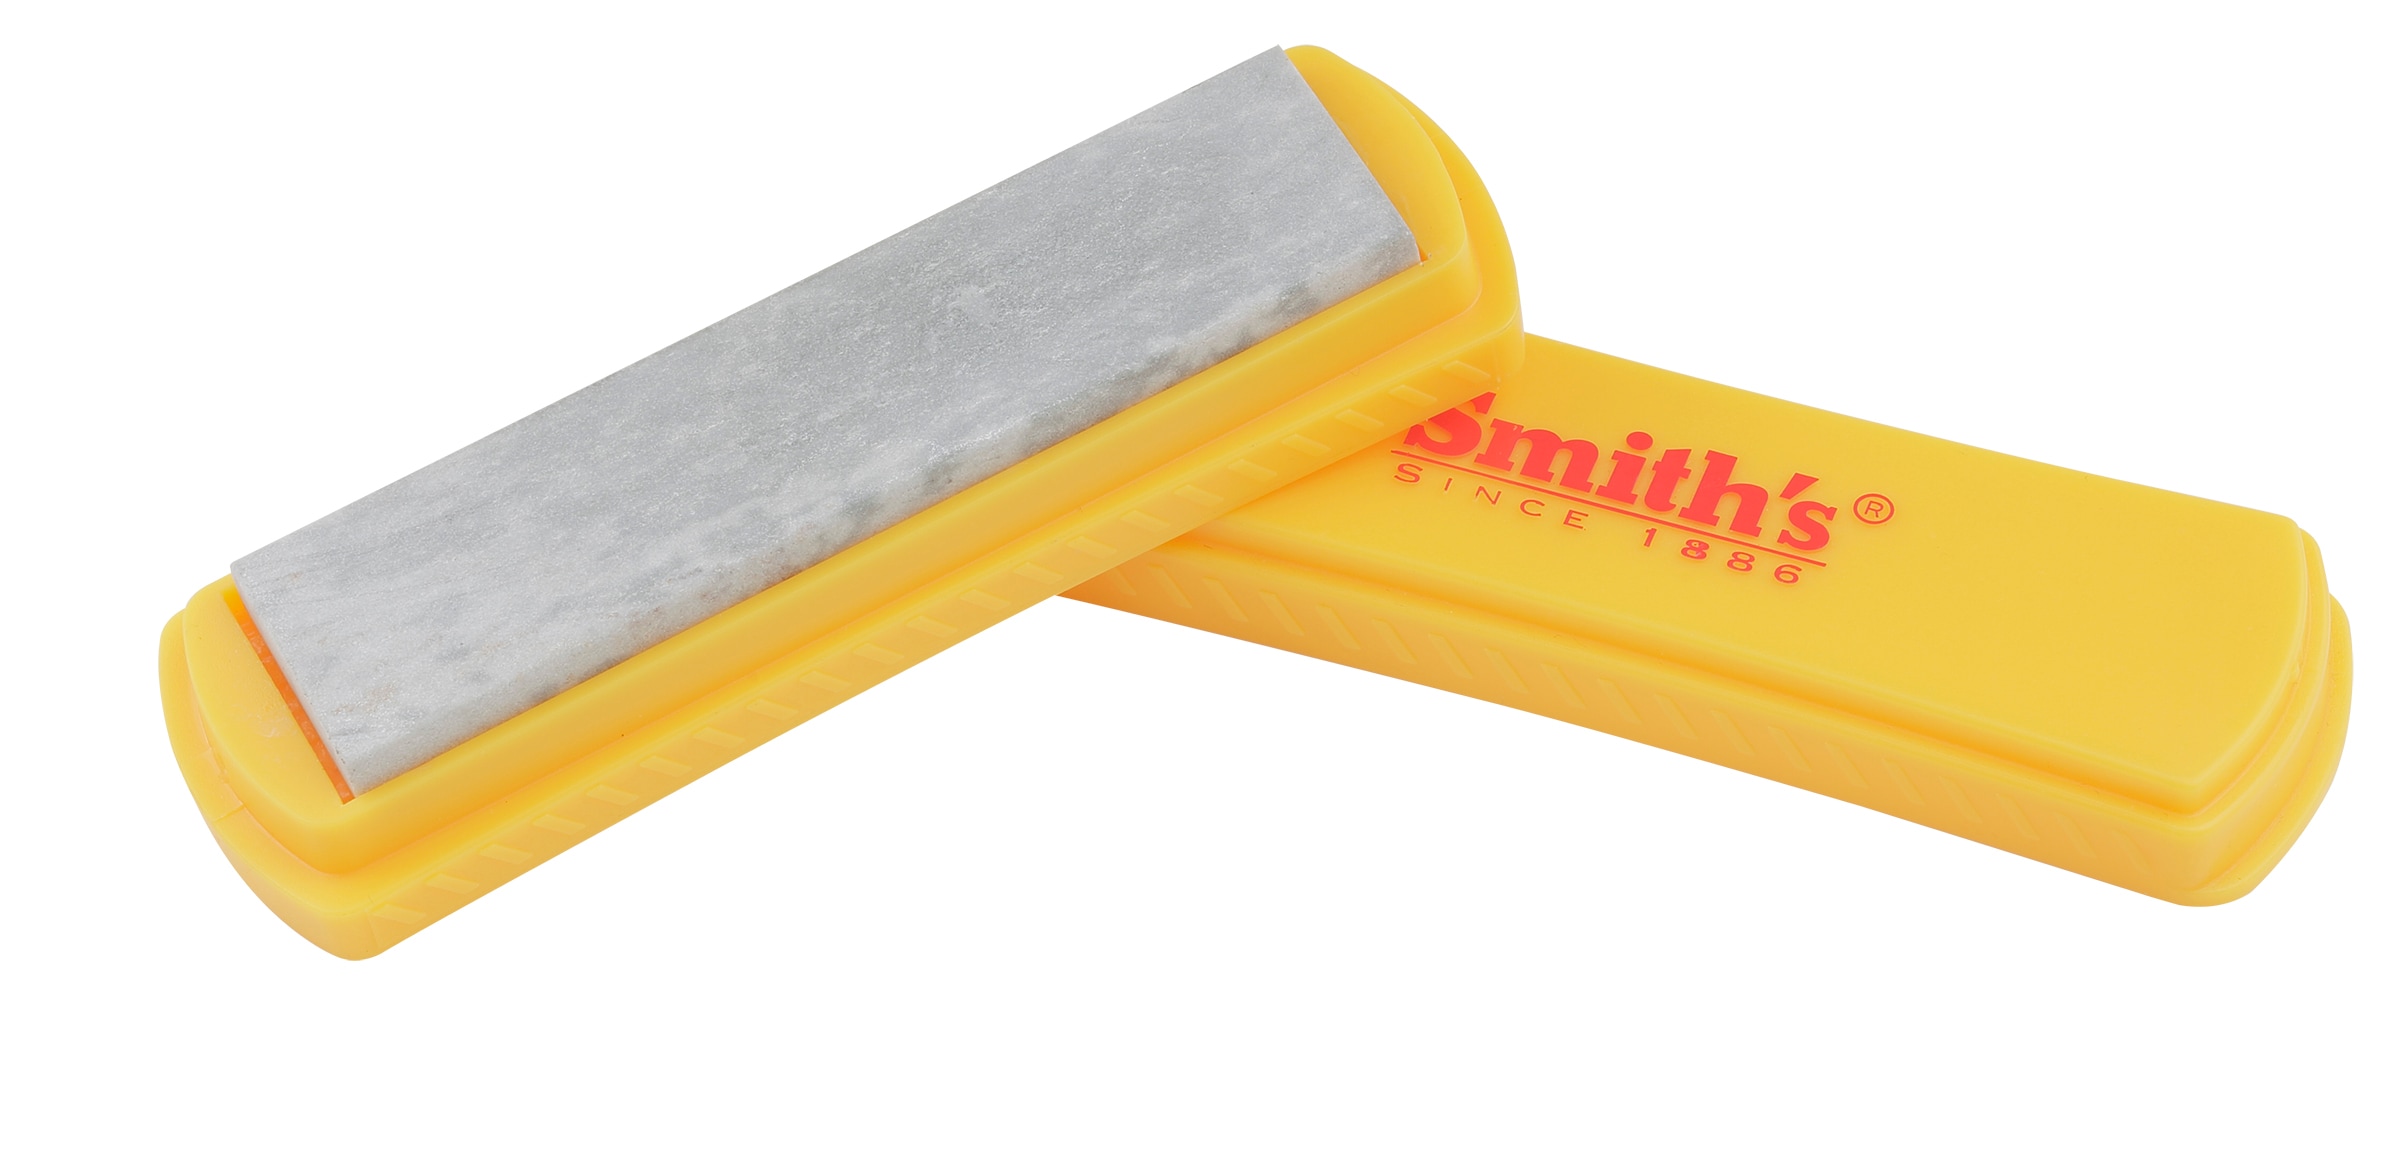 Smith's Consumer Products Store. DIAMOND/ARKANSAS STONE PRECISION SHARPENING  SYSTEM